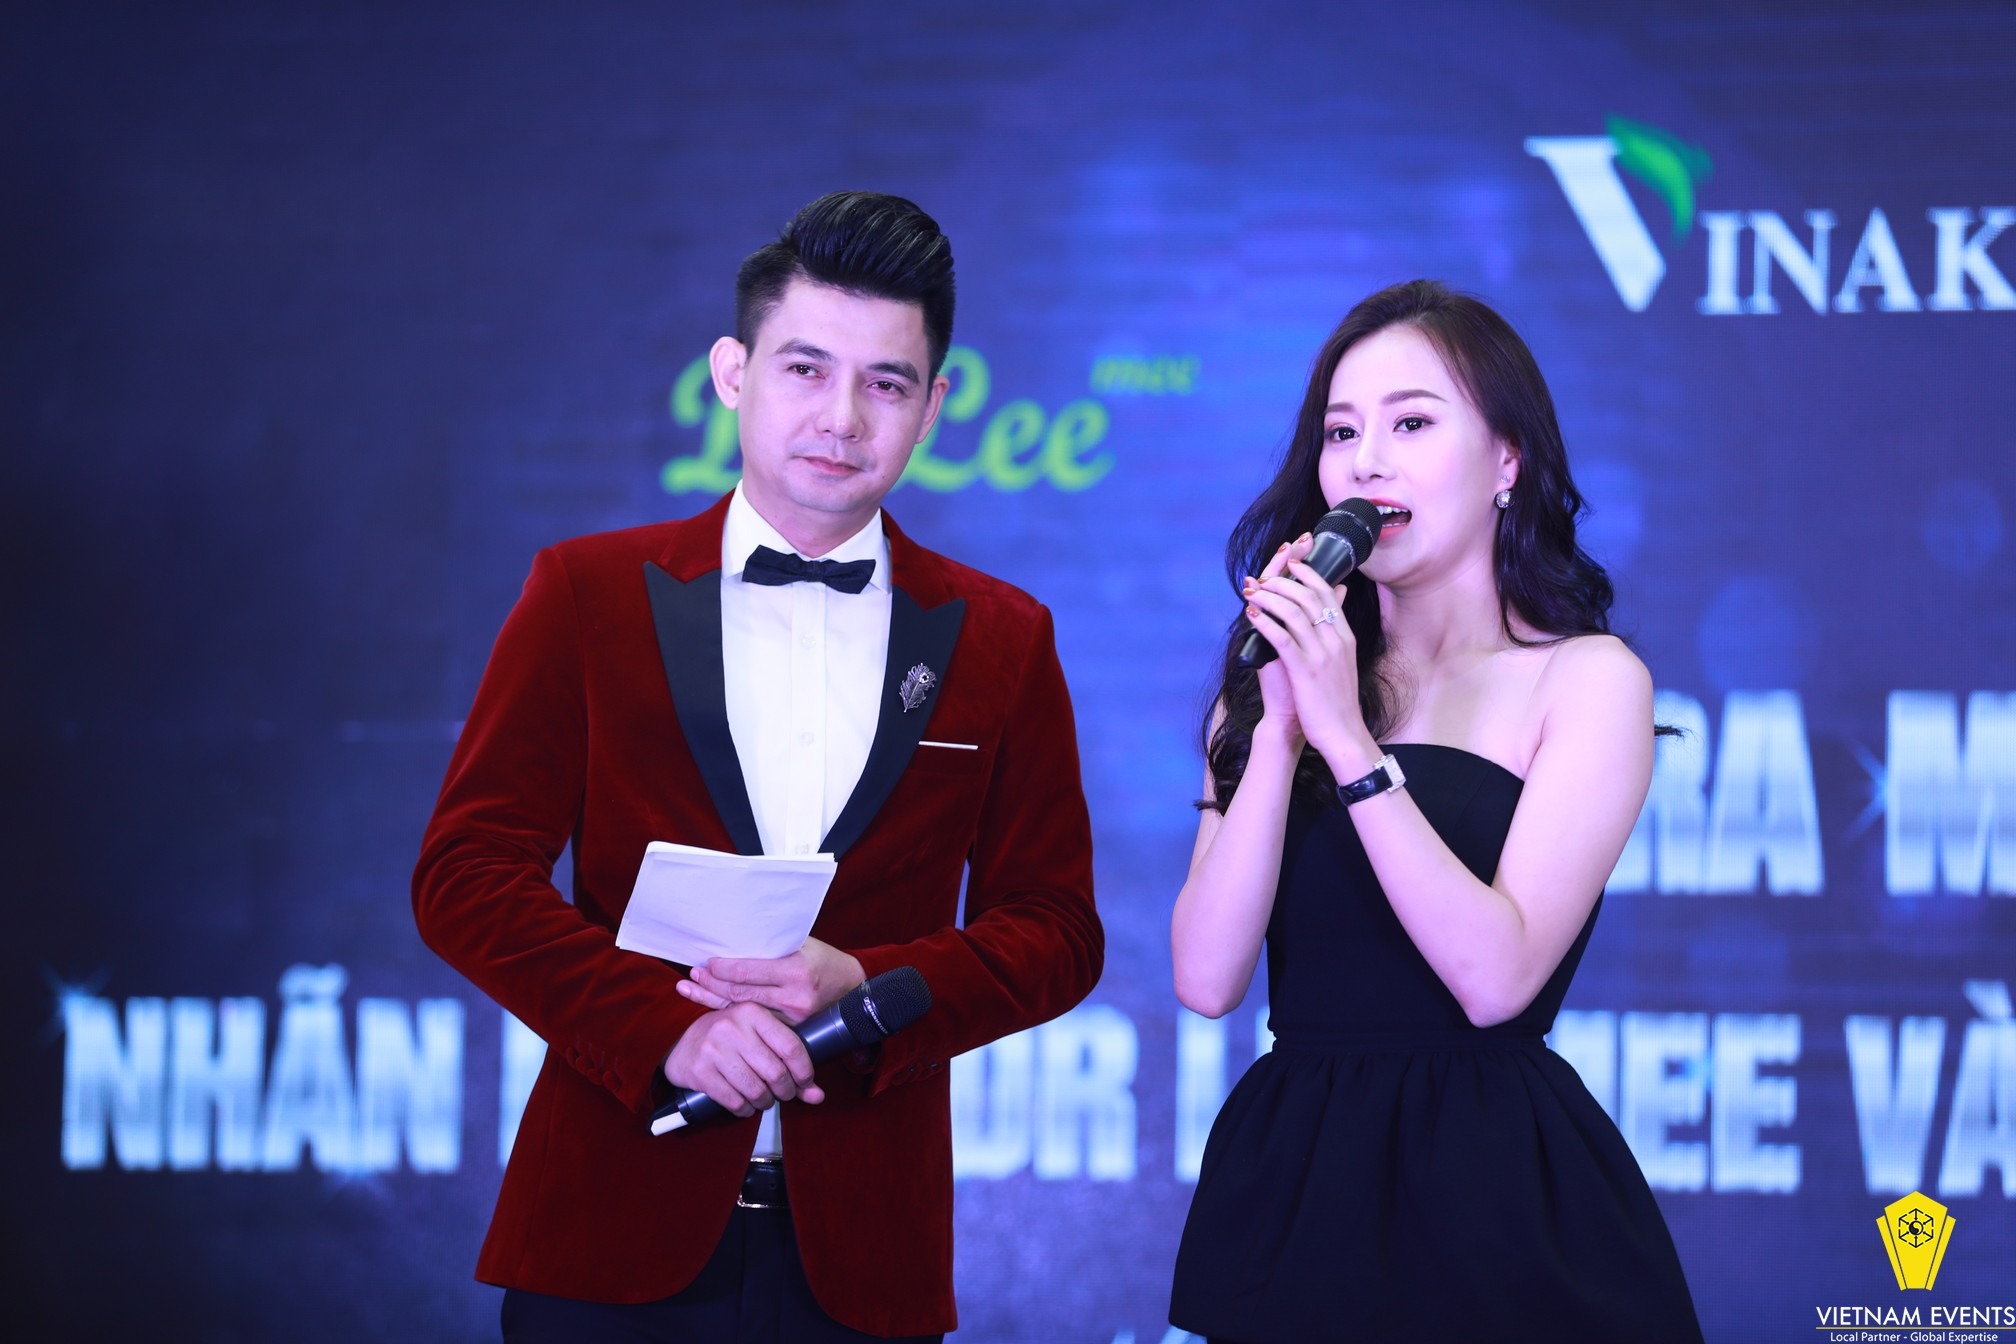 Dr Lee Mee and HB Health - Beauty product lauching event